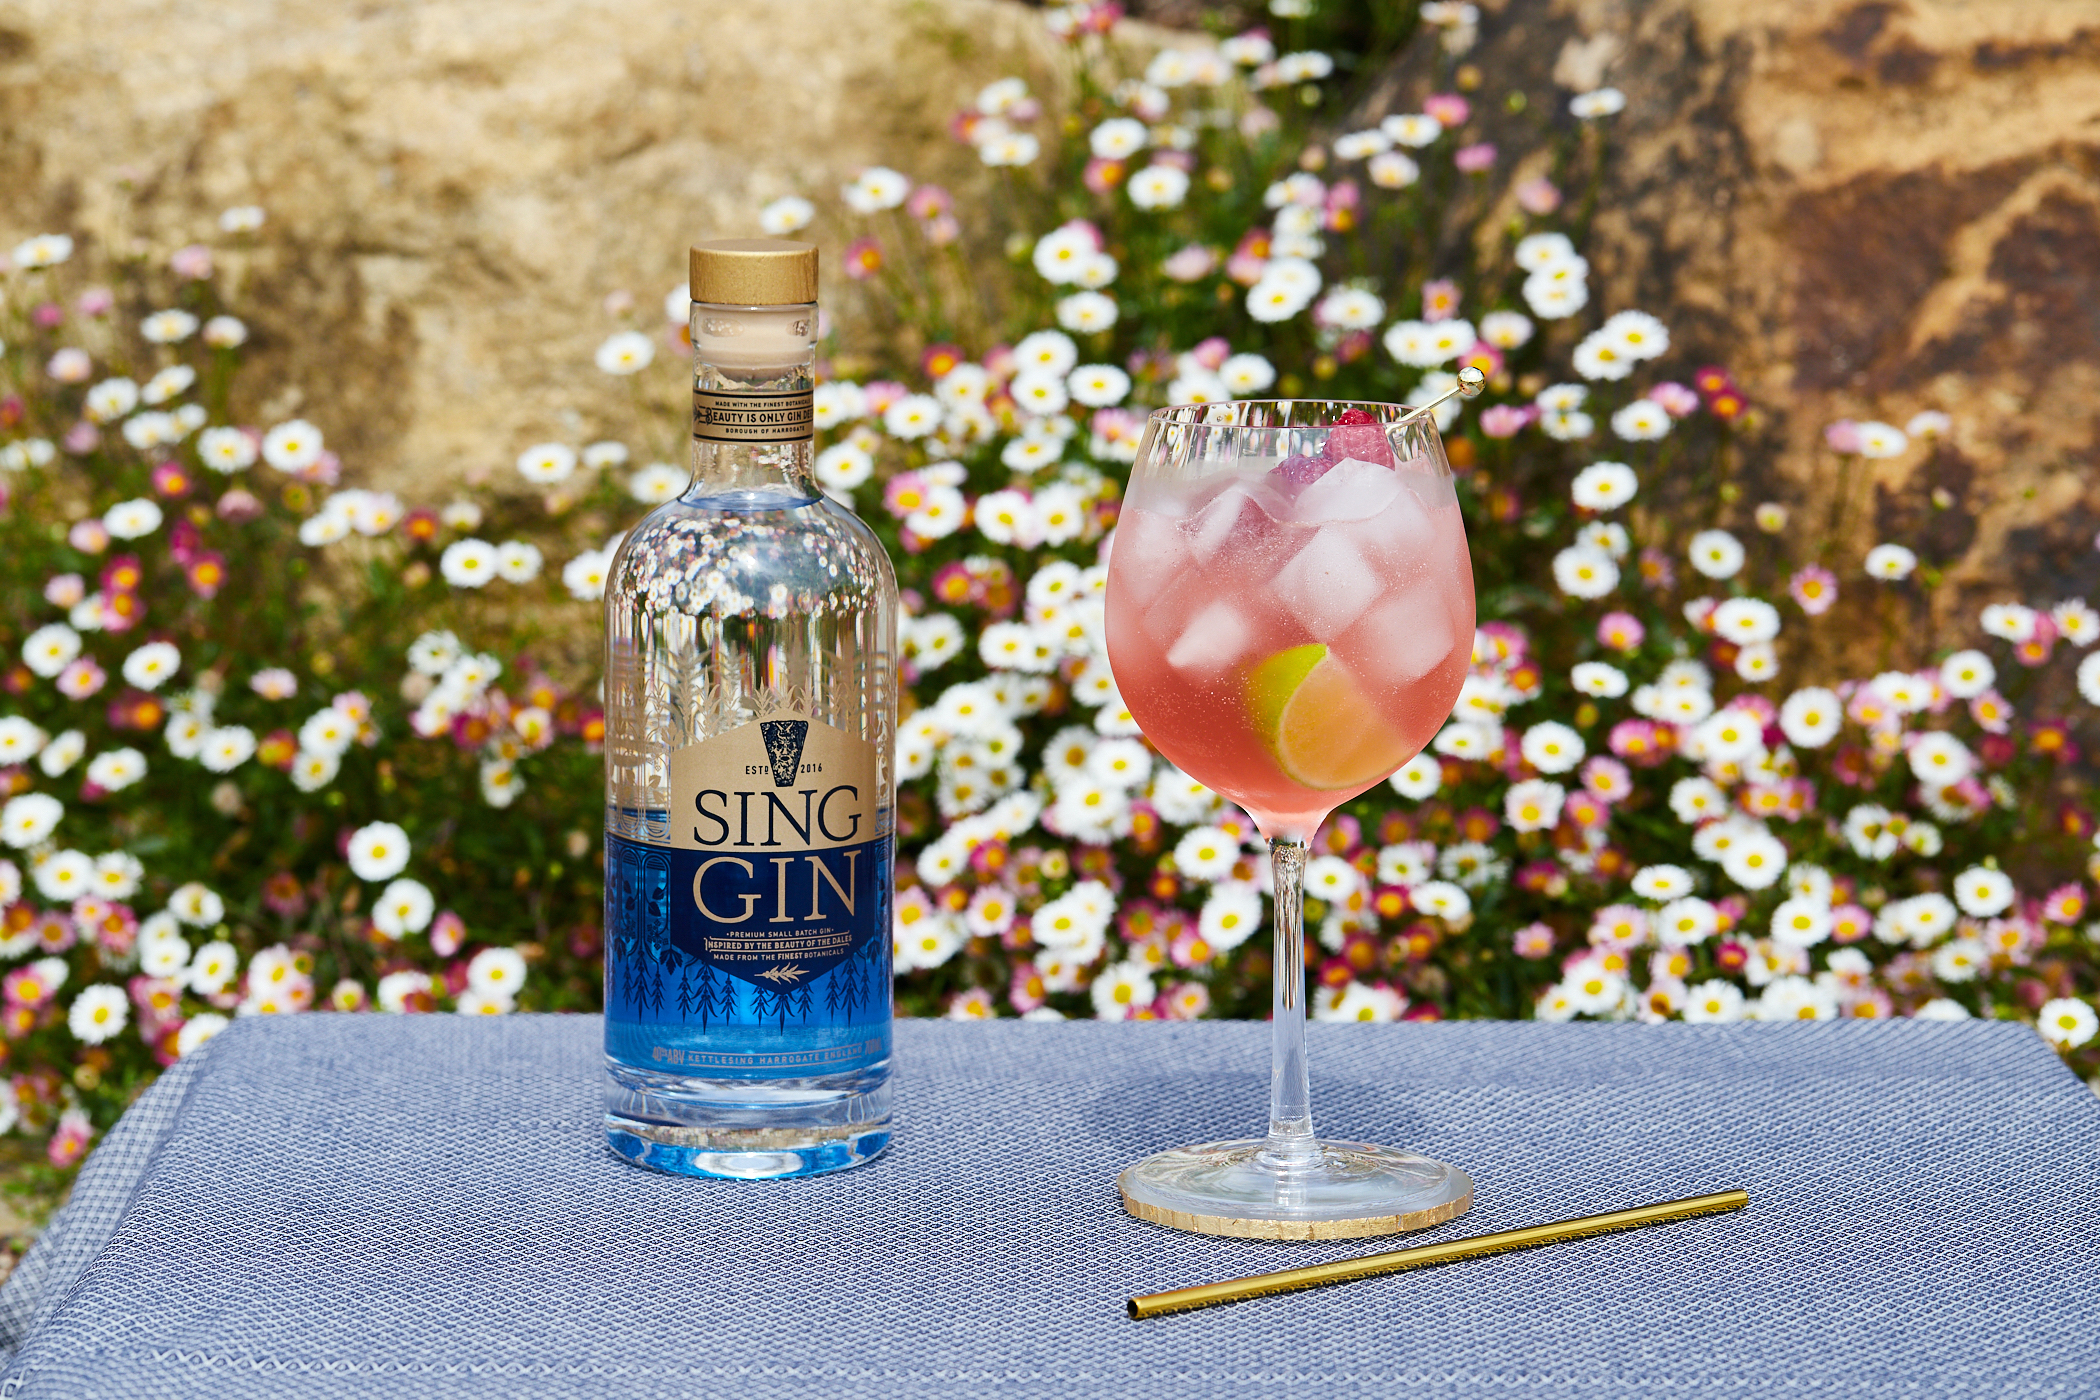 SING GIN - IS THIS THE GIN OF SUMMER 2021? 